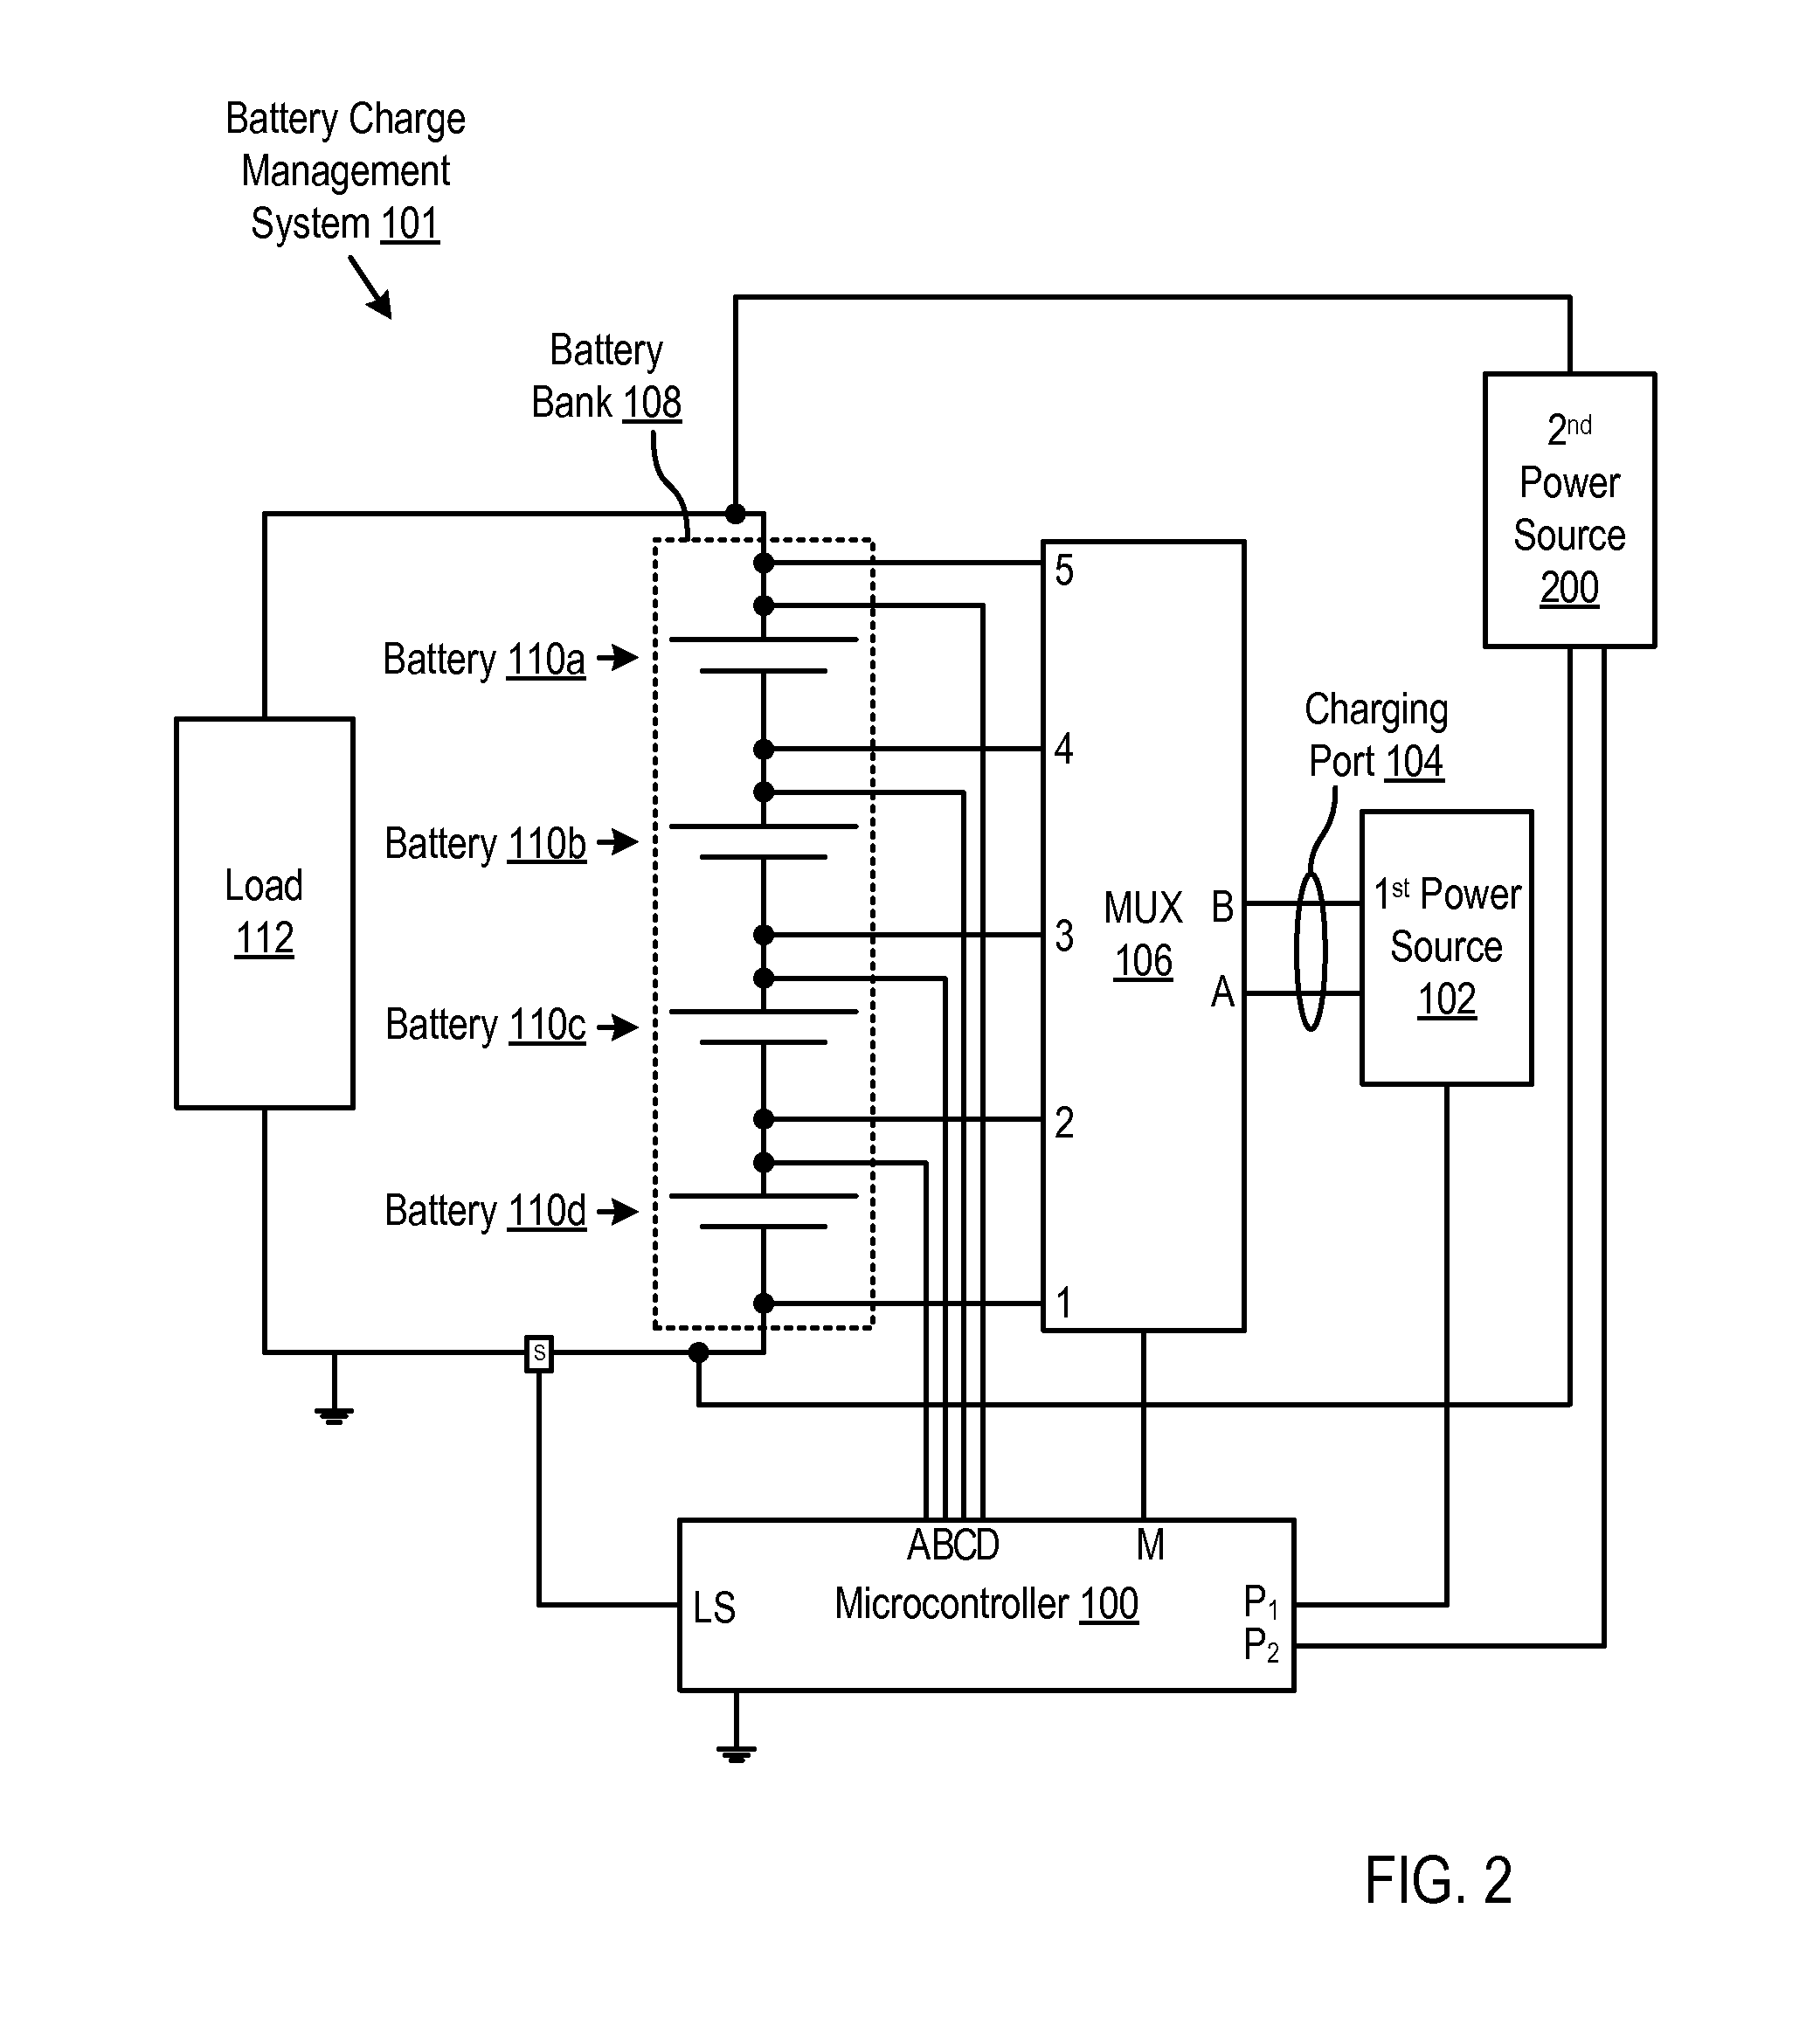 Battery Charge Management System For Charging A Battery Bank That Includes A Plurality Of Batteries